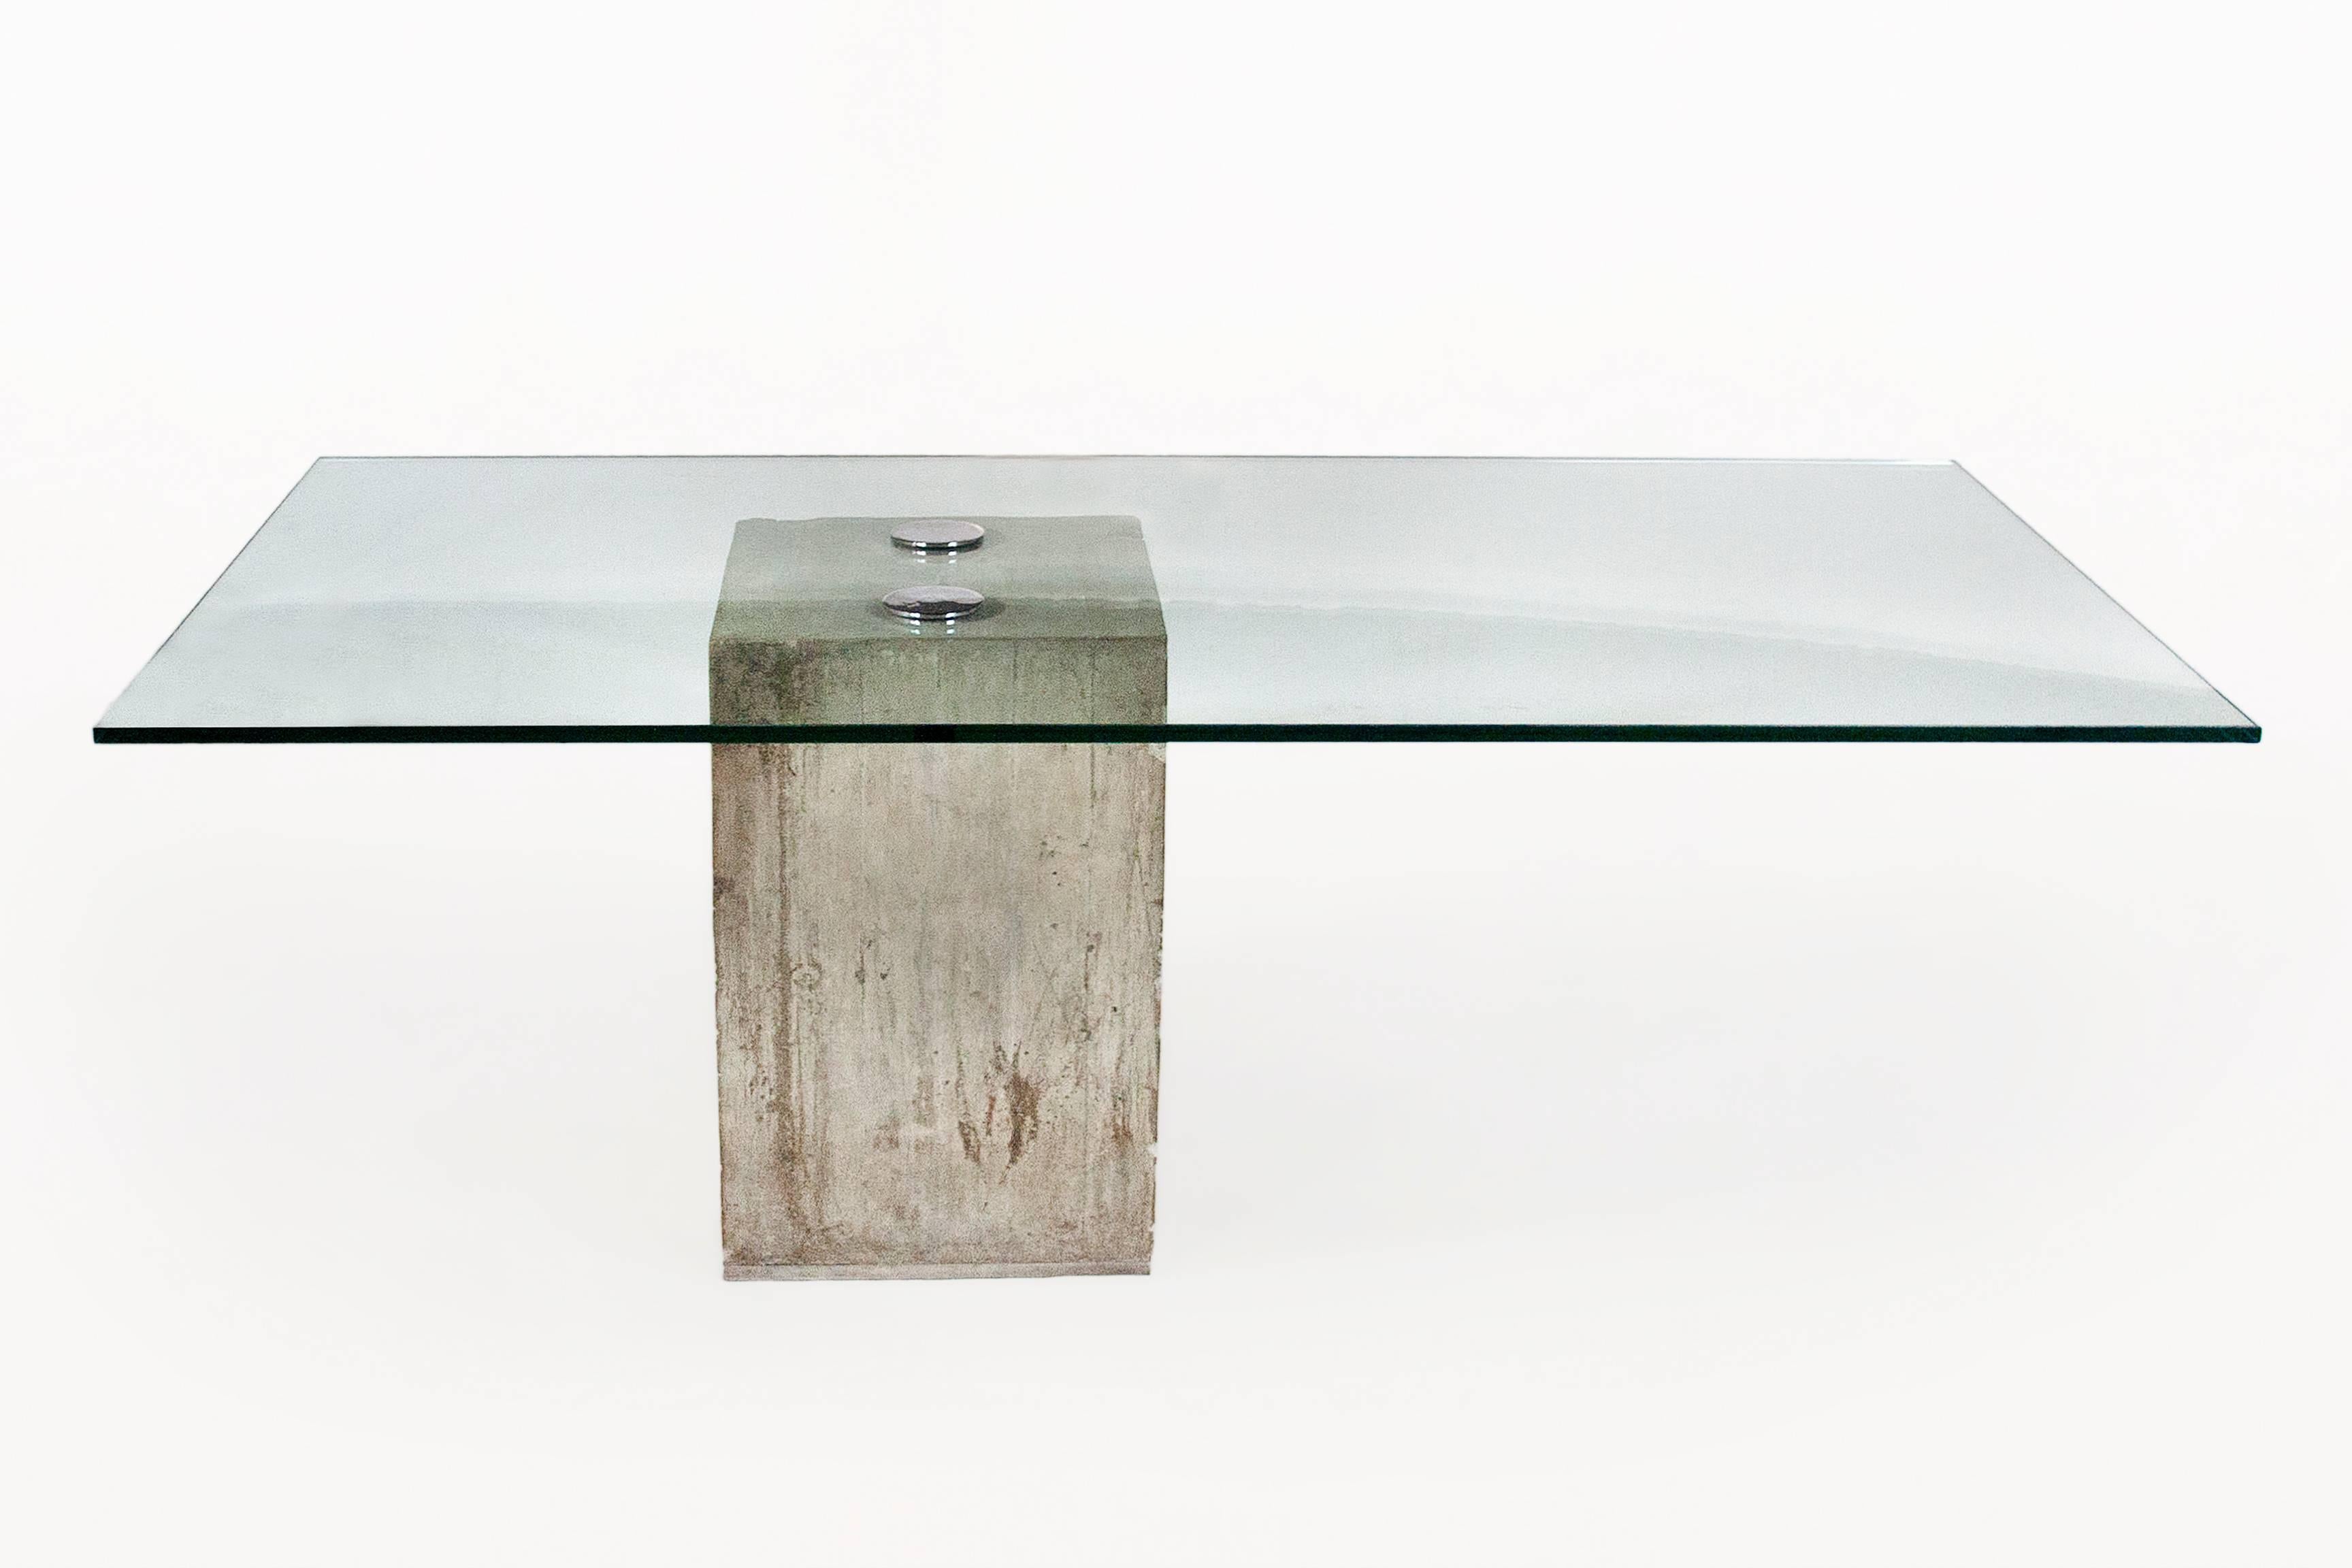 Glass and concrete dining table by Sergio & Giorgio Saporiti
Cast concrete base and glass top with chrome Knobs
Wear on the concrete base
circa 1970, Italy
Very good vintage condition.